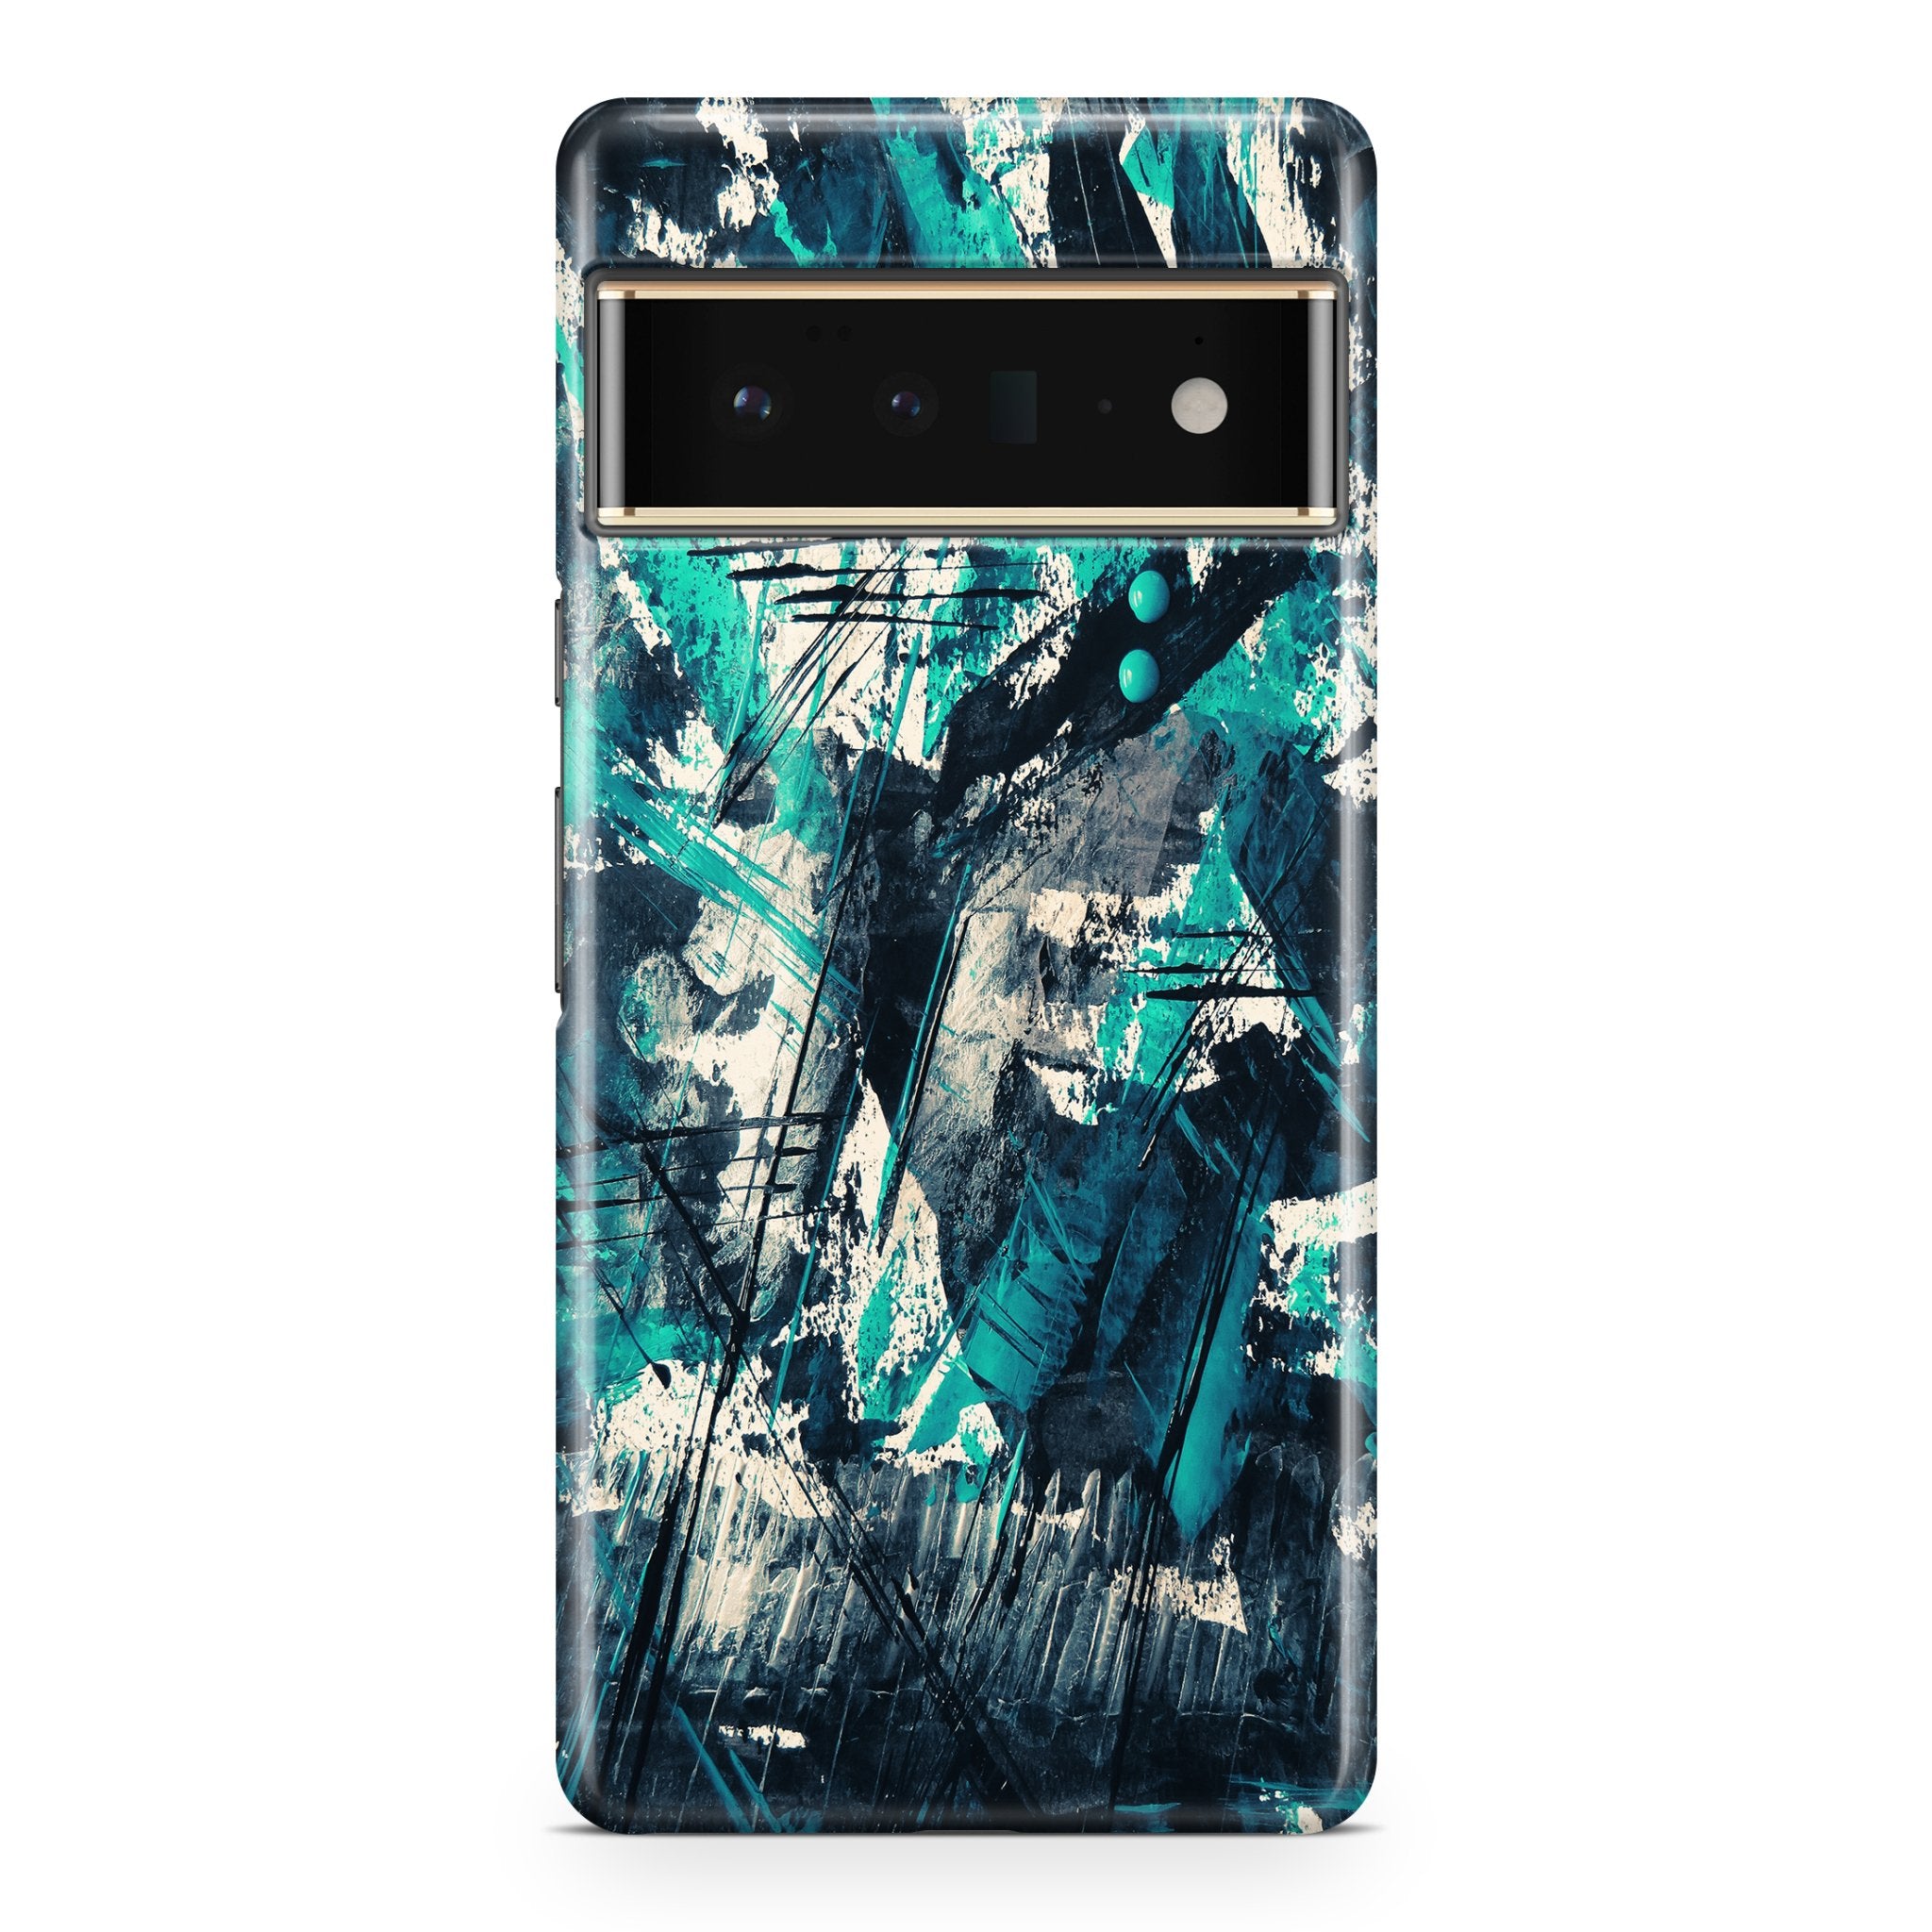 Blue Chaos - Google phone case designs by CaseSwagger